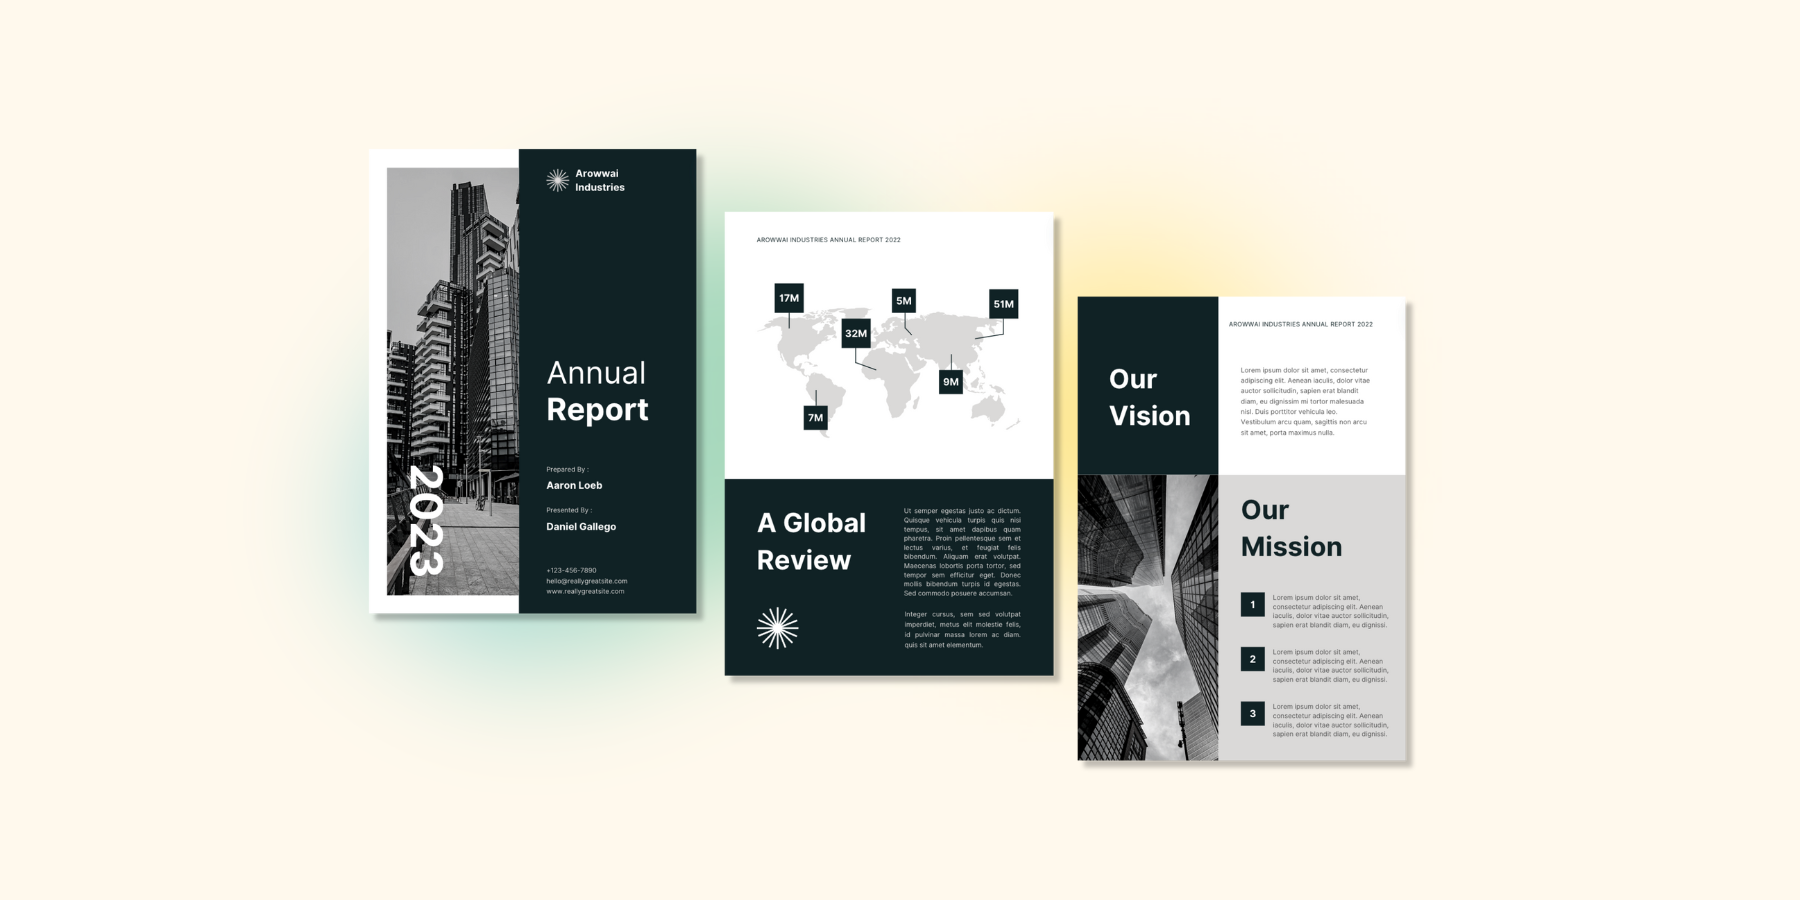 Annual report template from Canva featuring images with buildings and business graphs